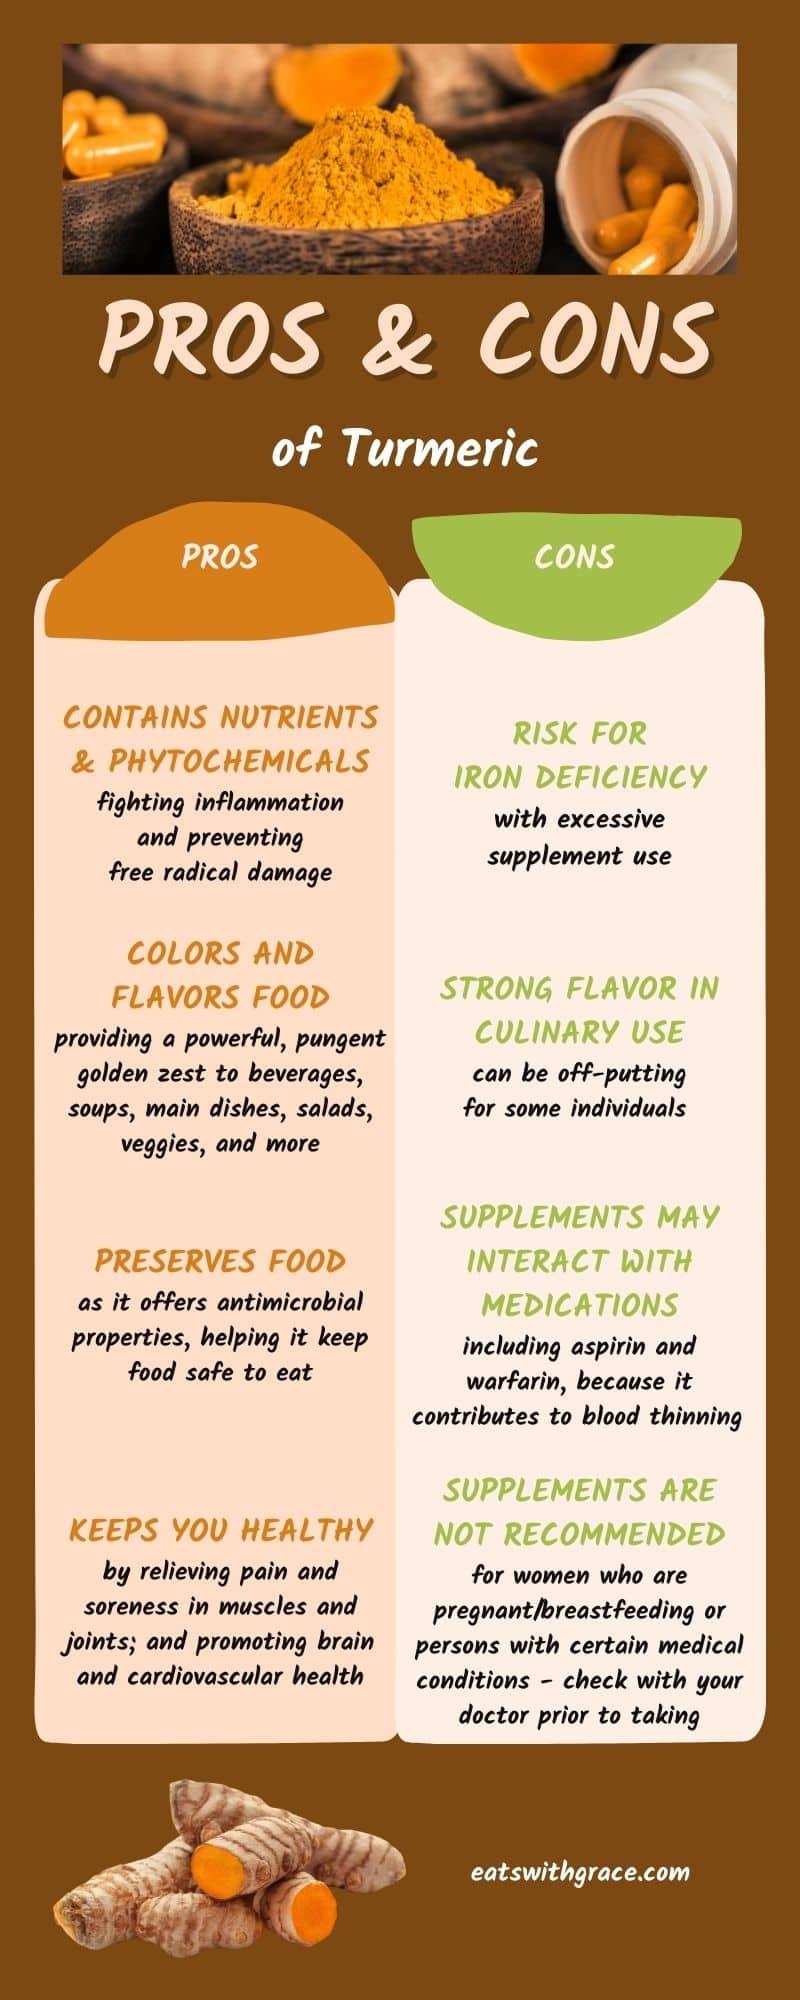 pros and cons of turmeric infographic